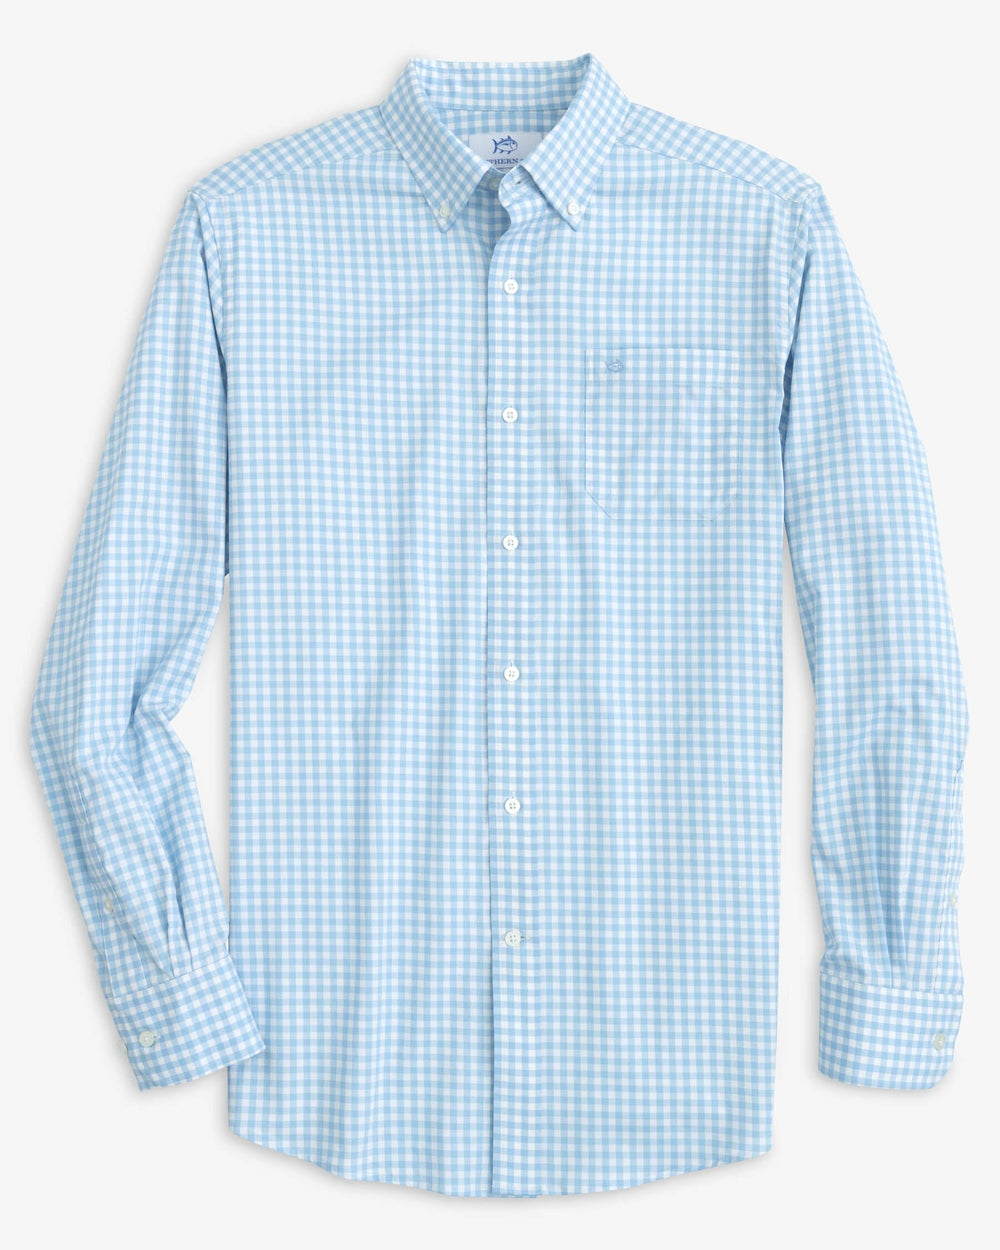 The front view of the Southern Tide Heather Hartwell Plaid Intercoastal Sport Shirt by Southern Tide - Heather Rain Water